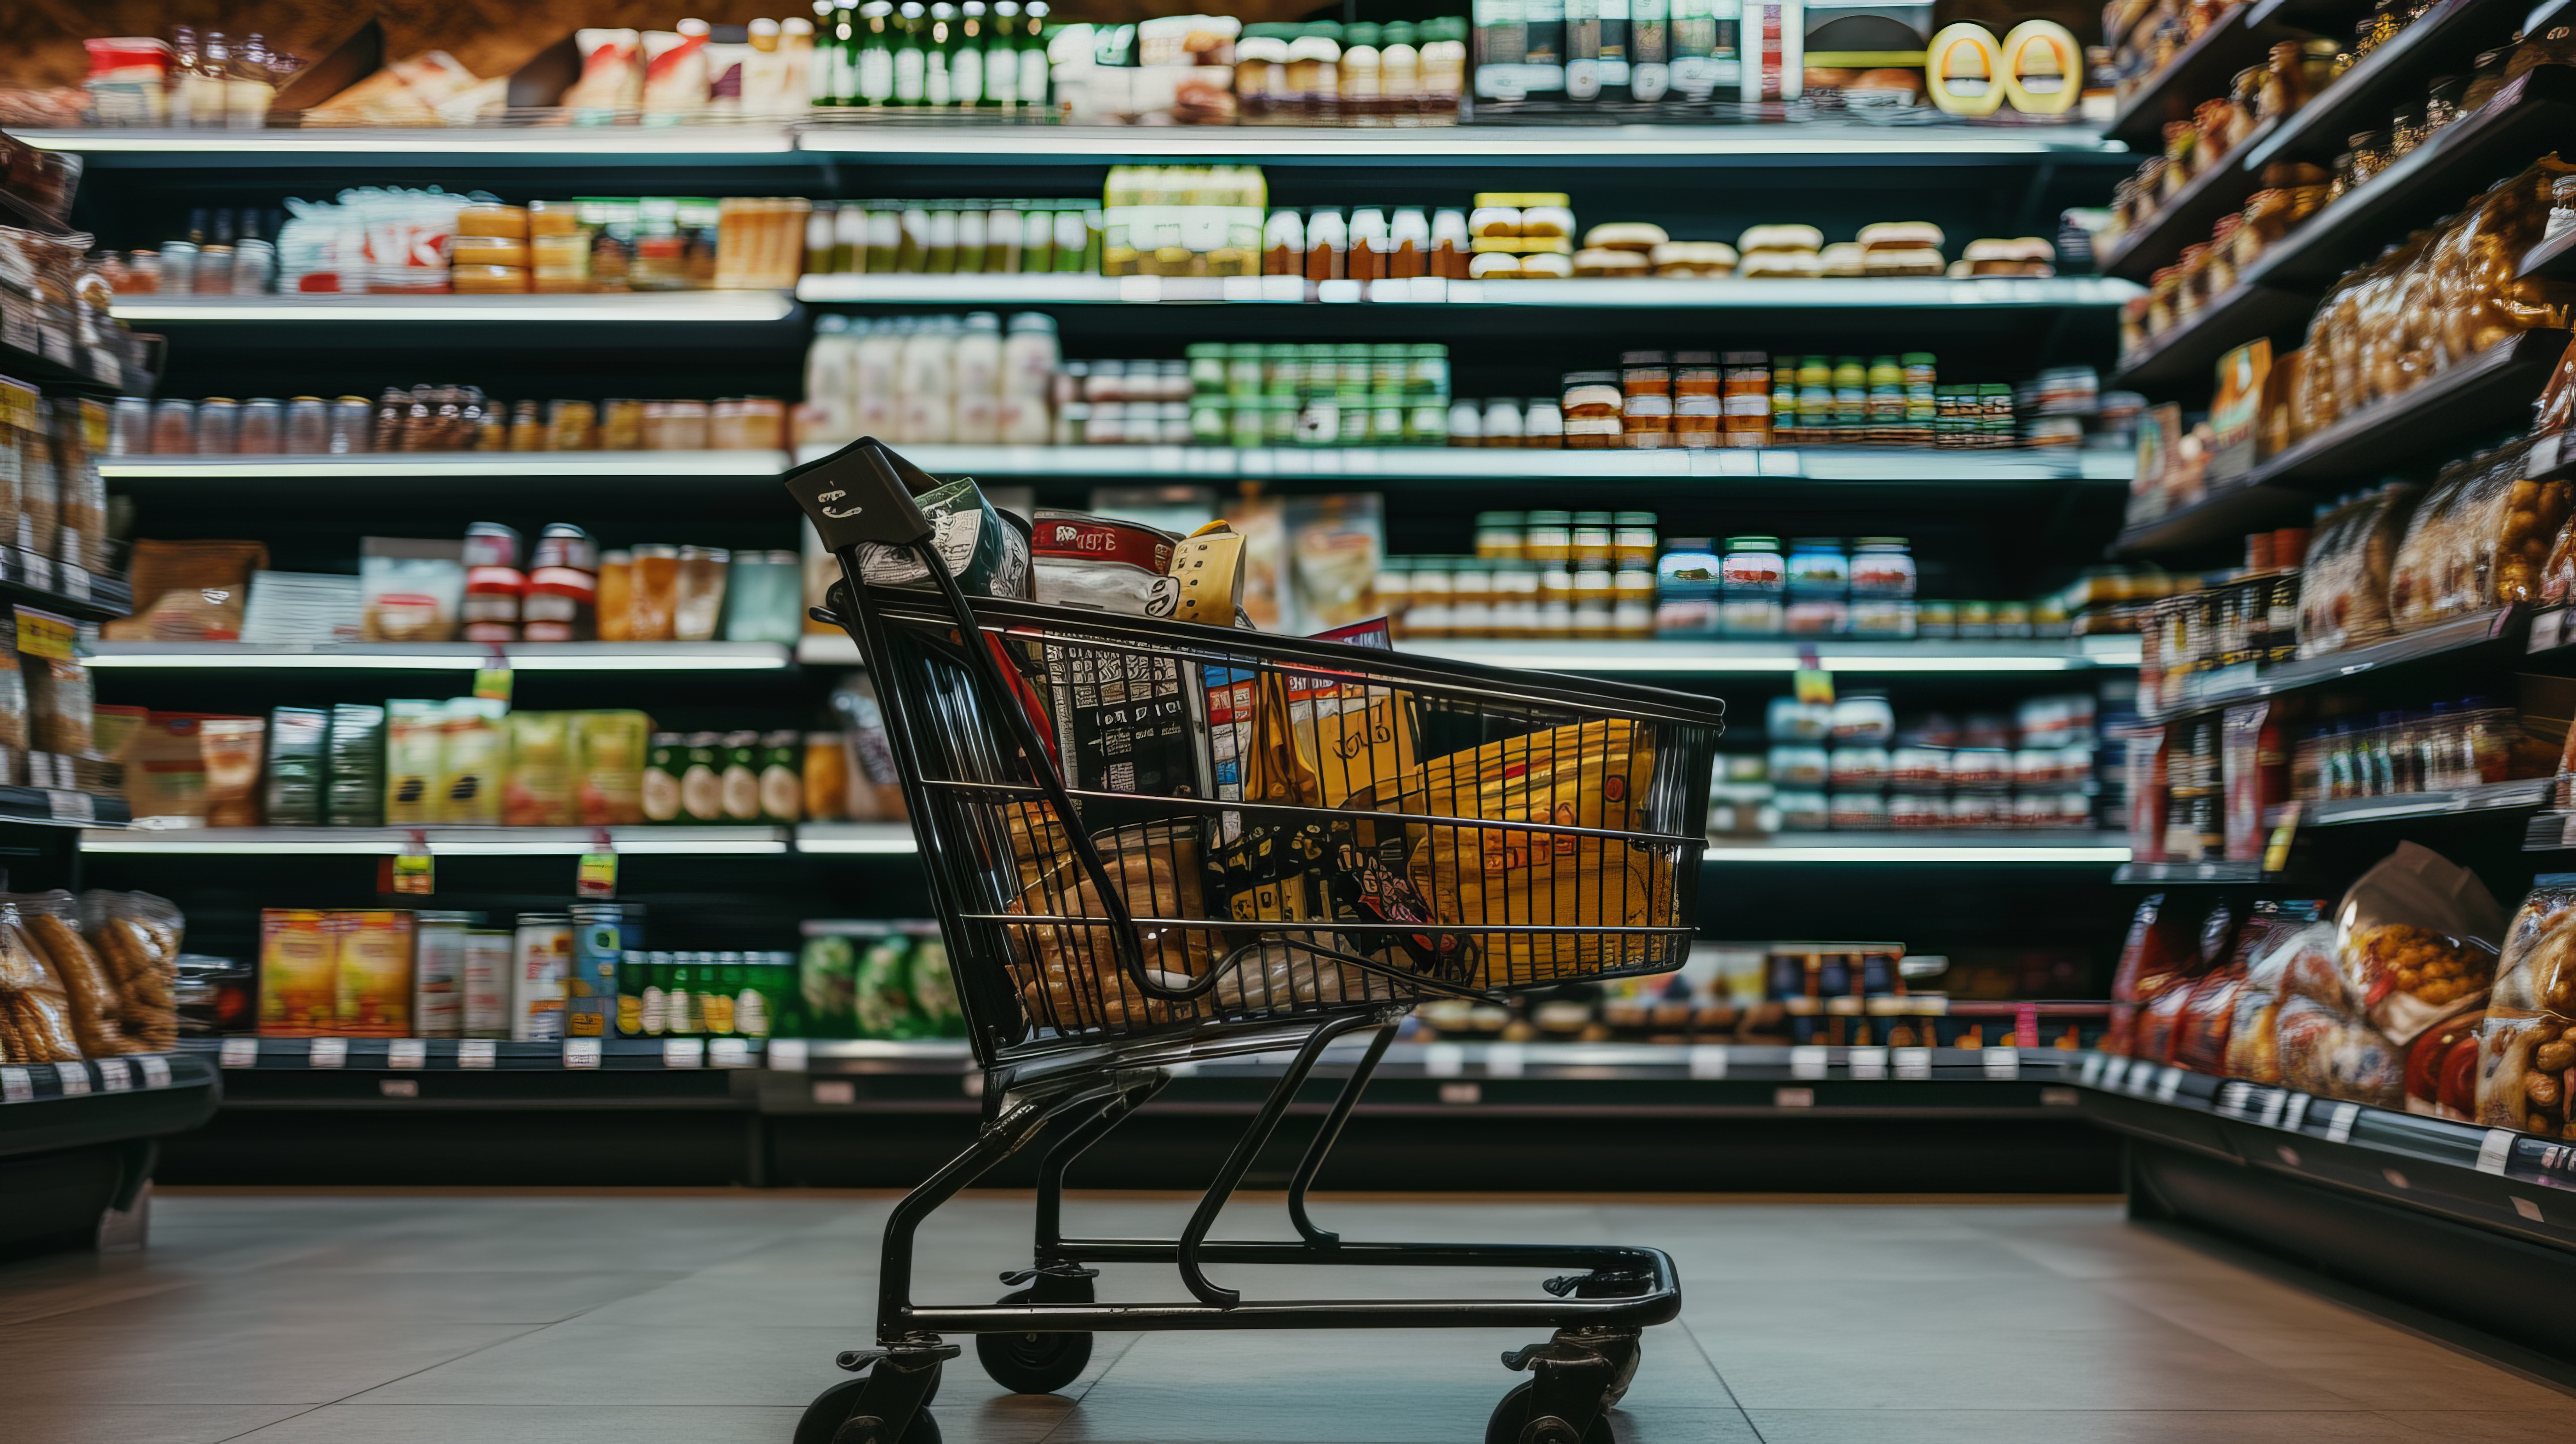 Shopping cart and shelves of products in a store (royalty free image from Pixabay)